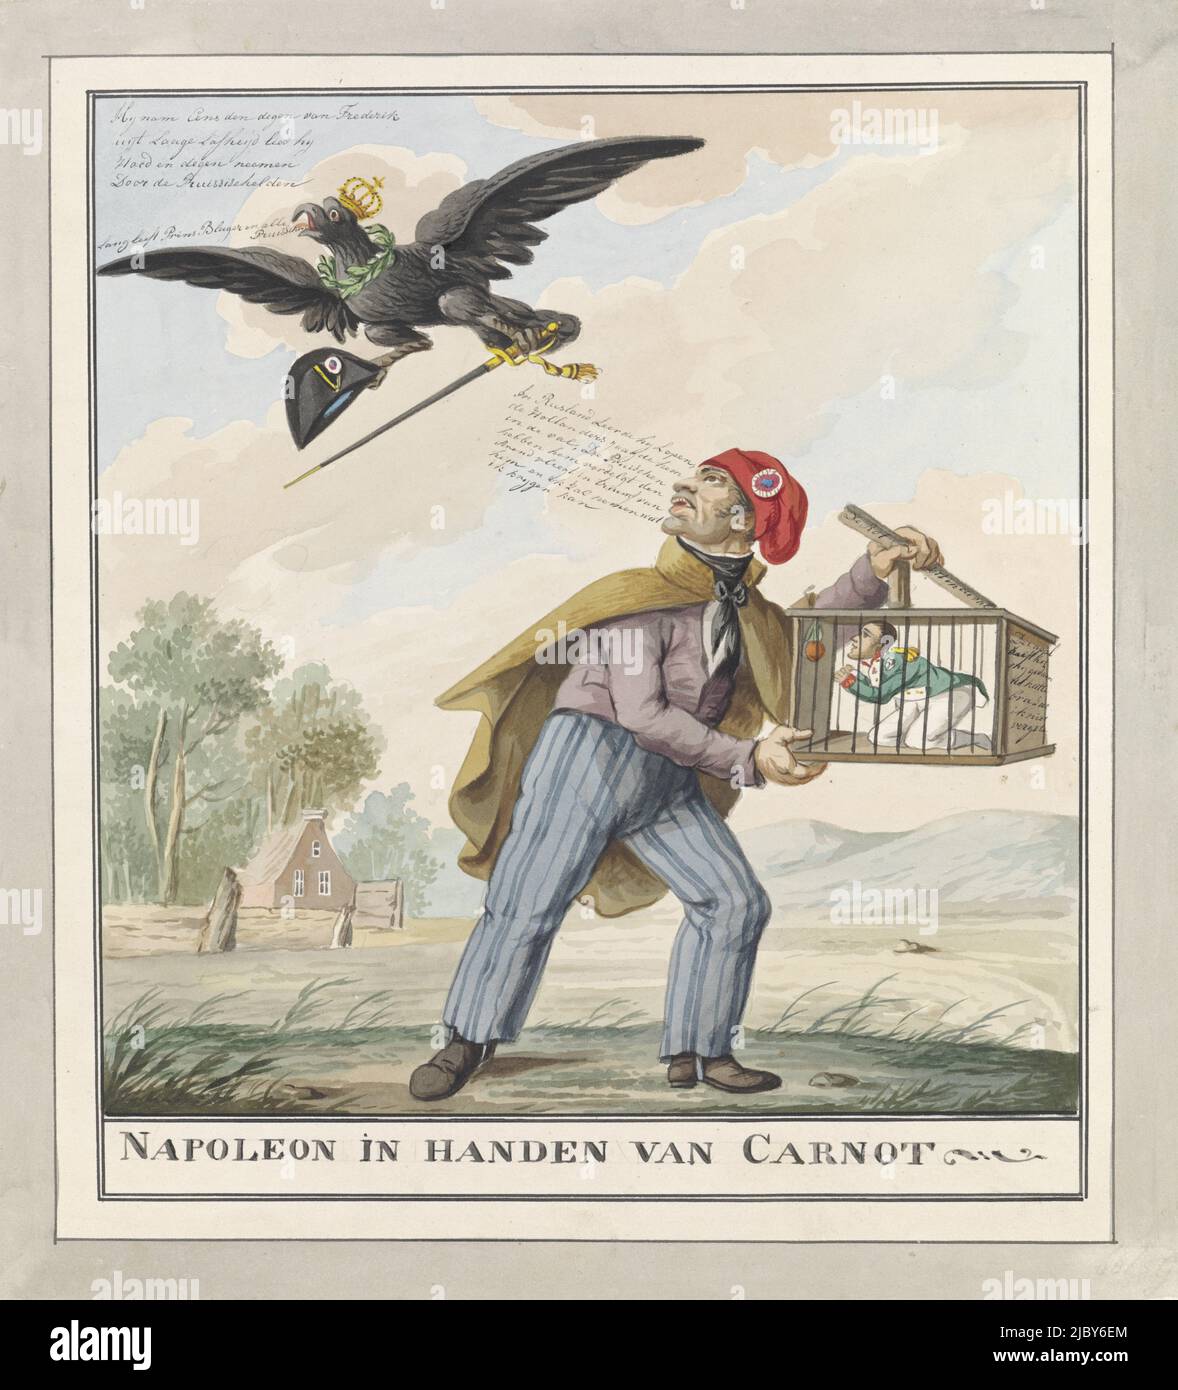 Napoleon captured by Carnot, 1815, Wijnand Esser, 1815, Lazare Carnot, with Jacobin hat, holds a small figure of Napoleon captive in a rat trap. In the trap hangs an Orange apple as bait. On the left, the Prussian eagle flies off with the emperor's sting and sword. Cartoon on the fall of Napoleon after the defeat at Waterloo on June 18, 1815., draughtsman: Wijnand Esser, (mentioned on object), Netherlands, 1815, paper, pen, brush, h 336 mm × w 305 mm Stock Photo